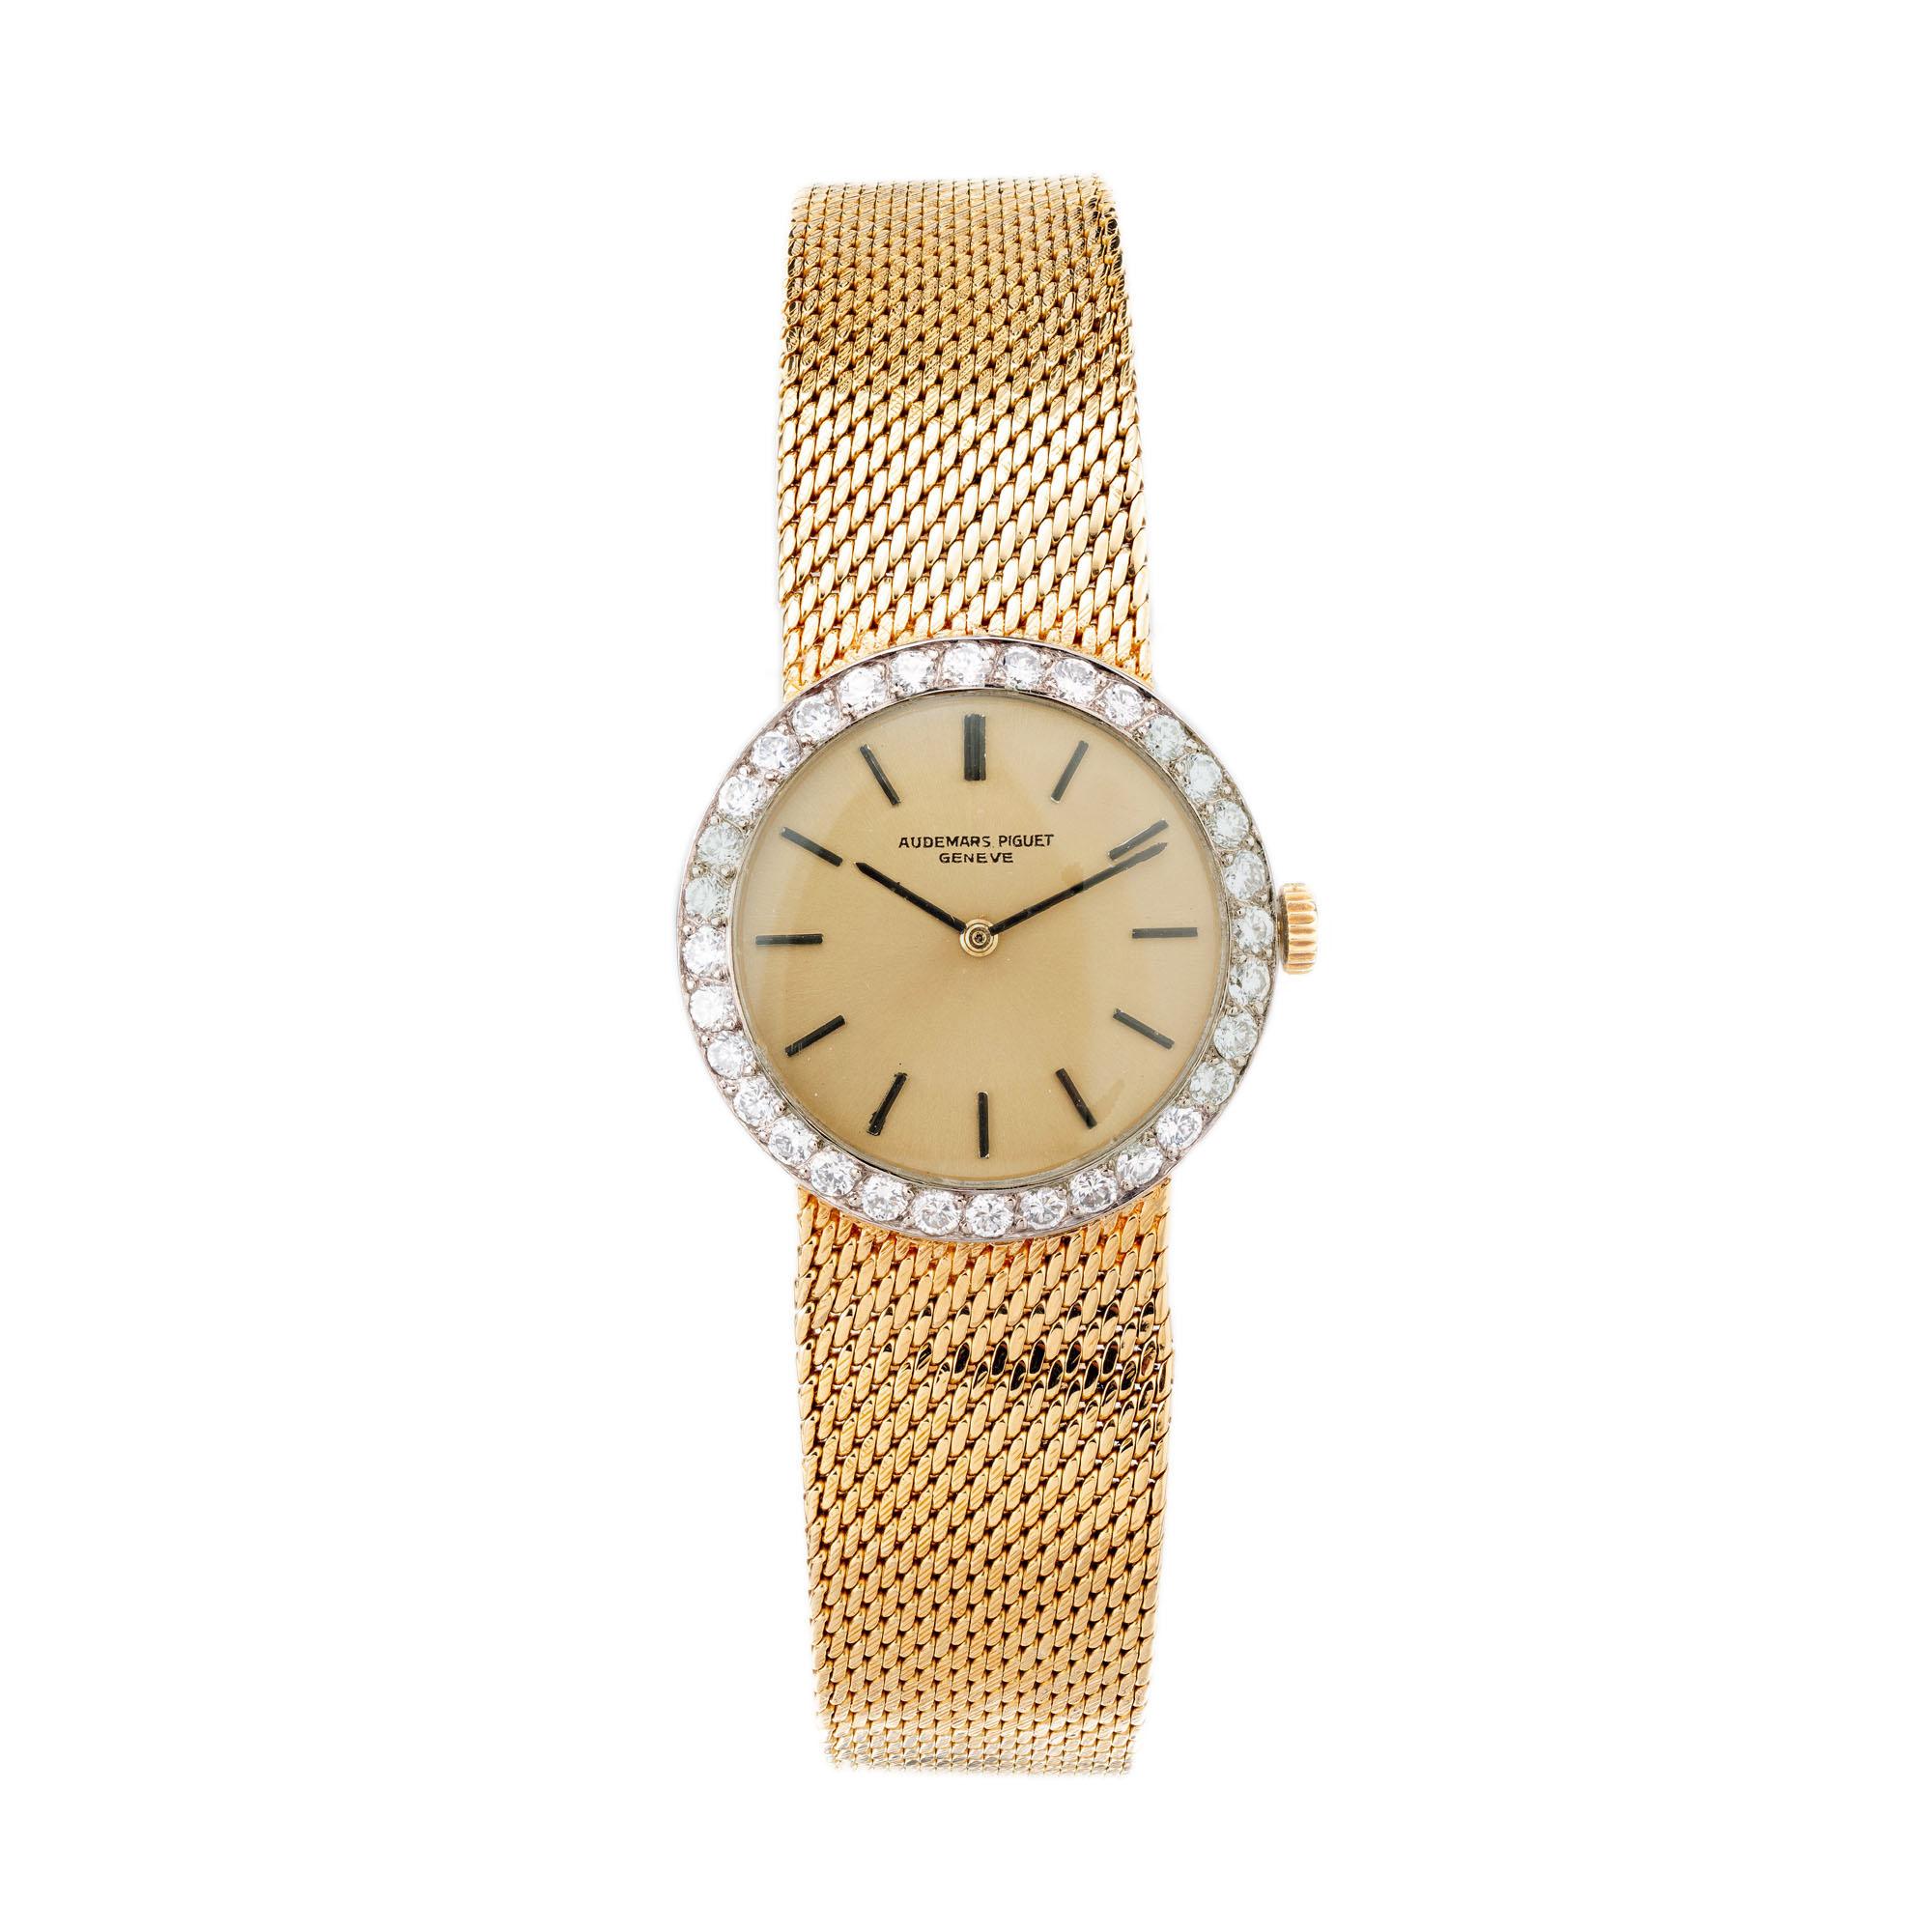 Audemars Piguet ladies 18k yellow gold diamond wristwatch with 18k yellow gold original mesh band. White gold bezel with 32 round cut accent diamonds.  6.5 to 6.75 inches in length. 

32 round diamonds, approx total weight: .64cts, VS, G
Length: